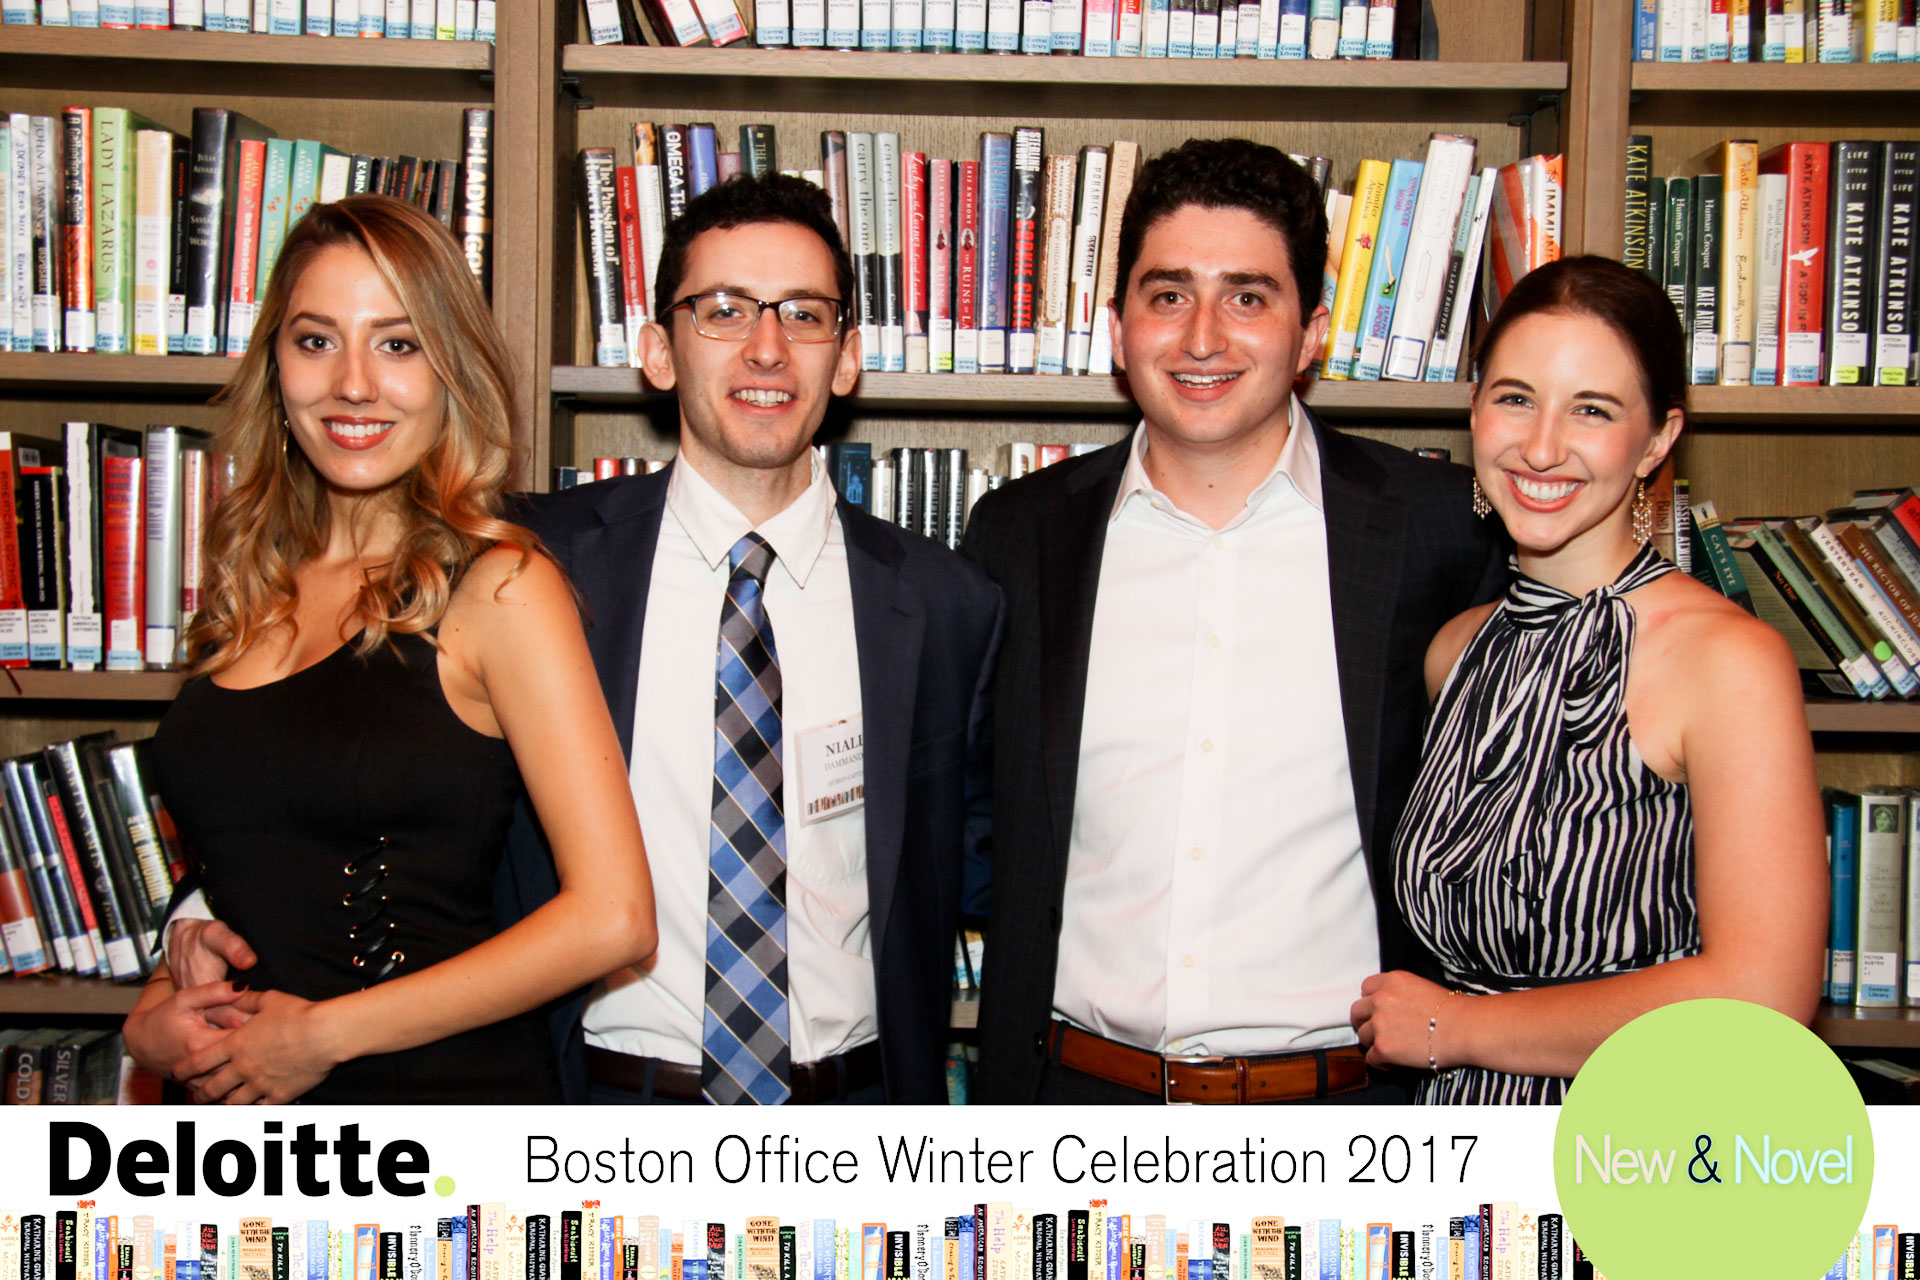 Deloitte Photo Station at Boston Public Library 5x7 Print of Group